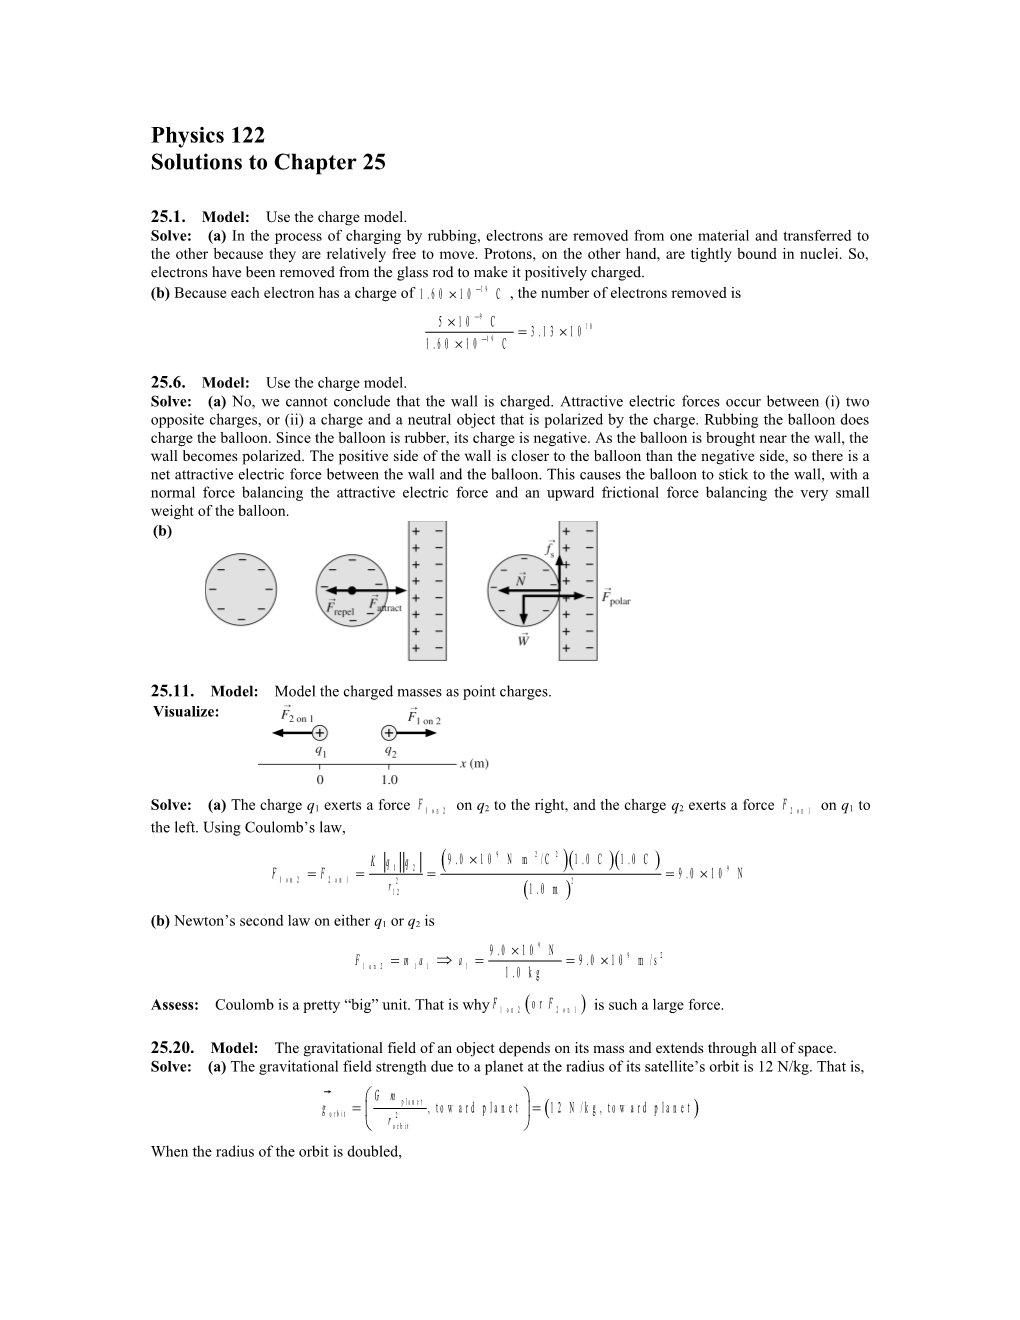 Solutions to Chapter 25